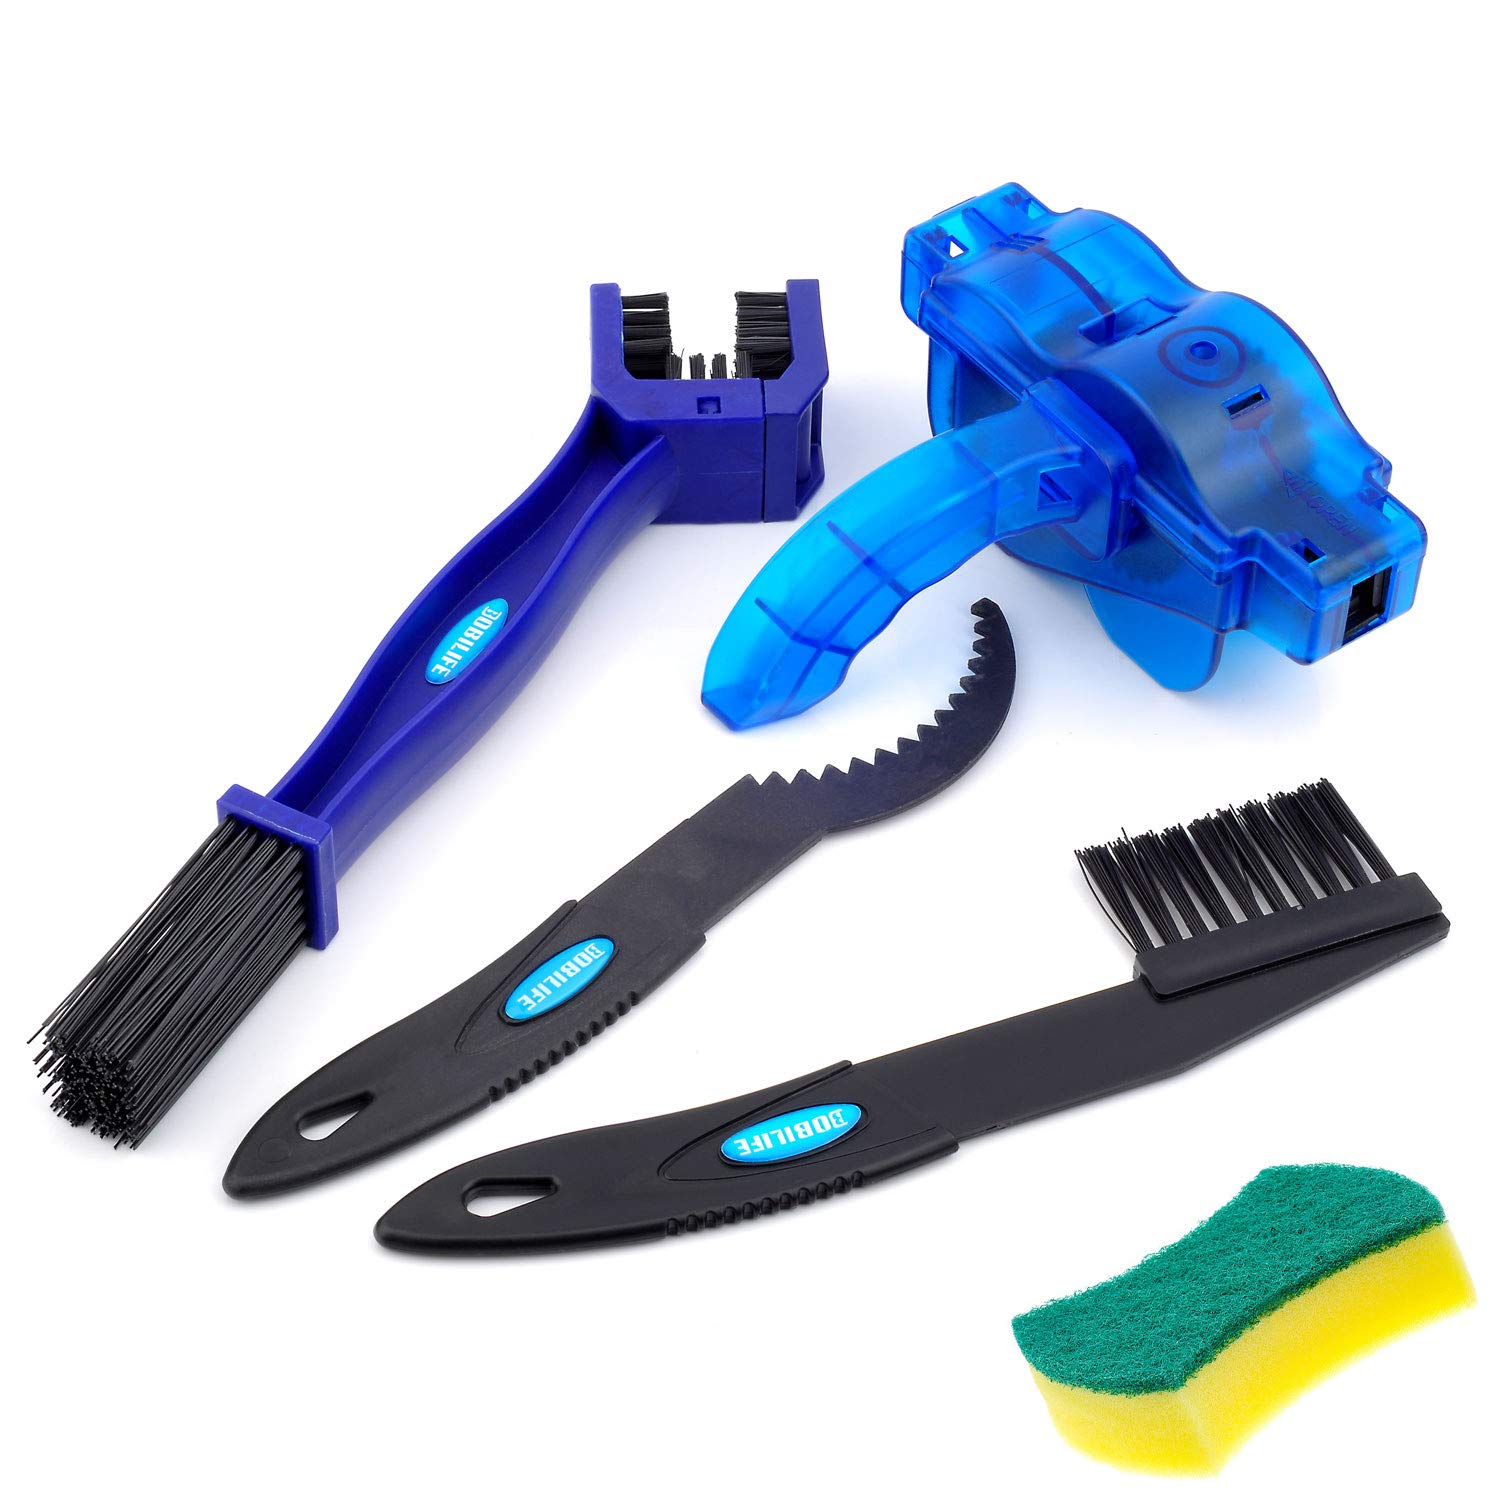 BOBILIFE Bike Cleaner Tools, Chain and Gear Cleaning Brush